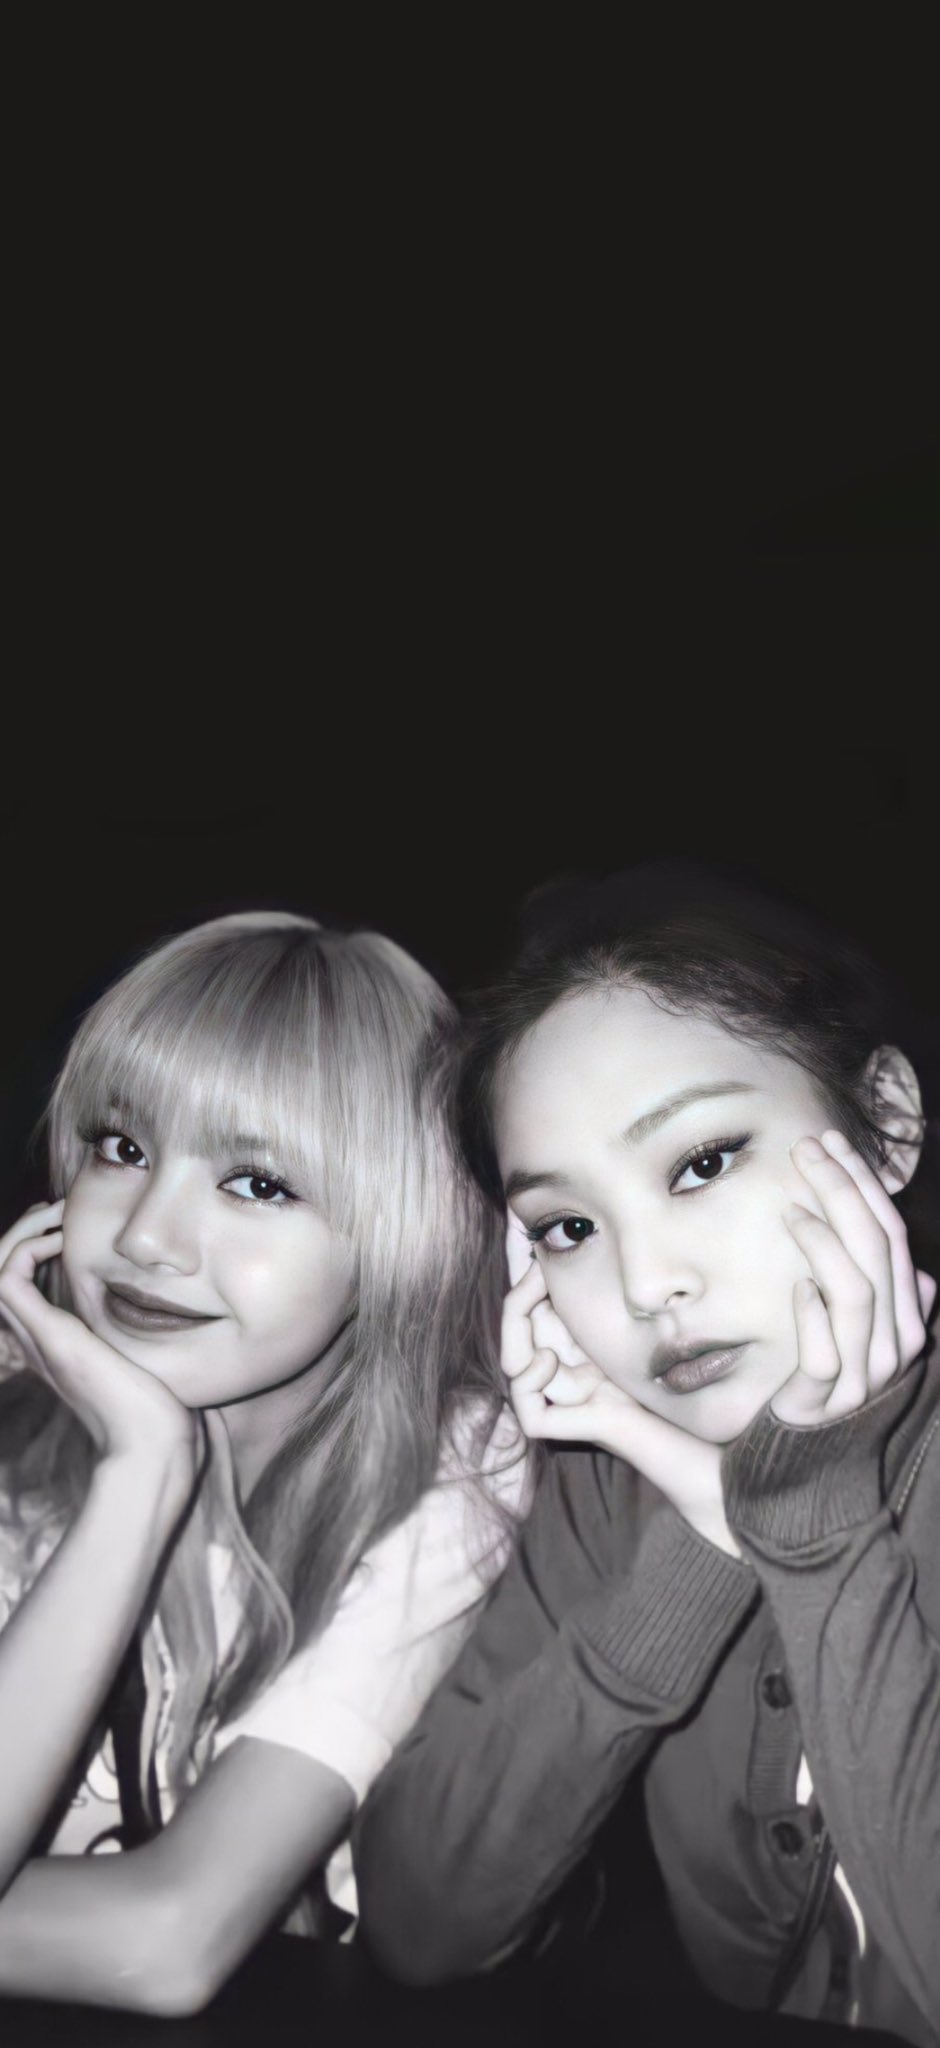 Jennie and Lisa - Image Abyss